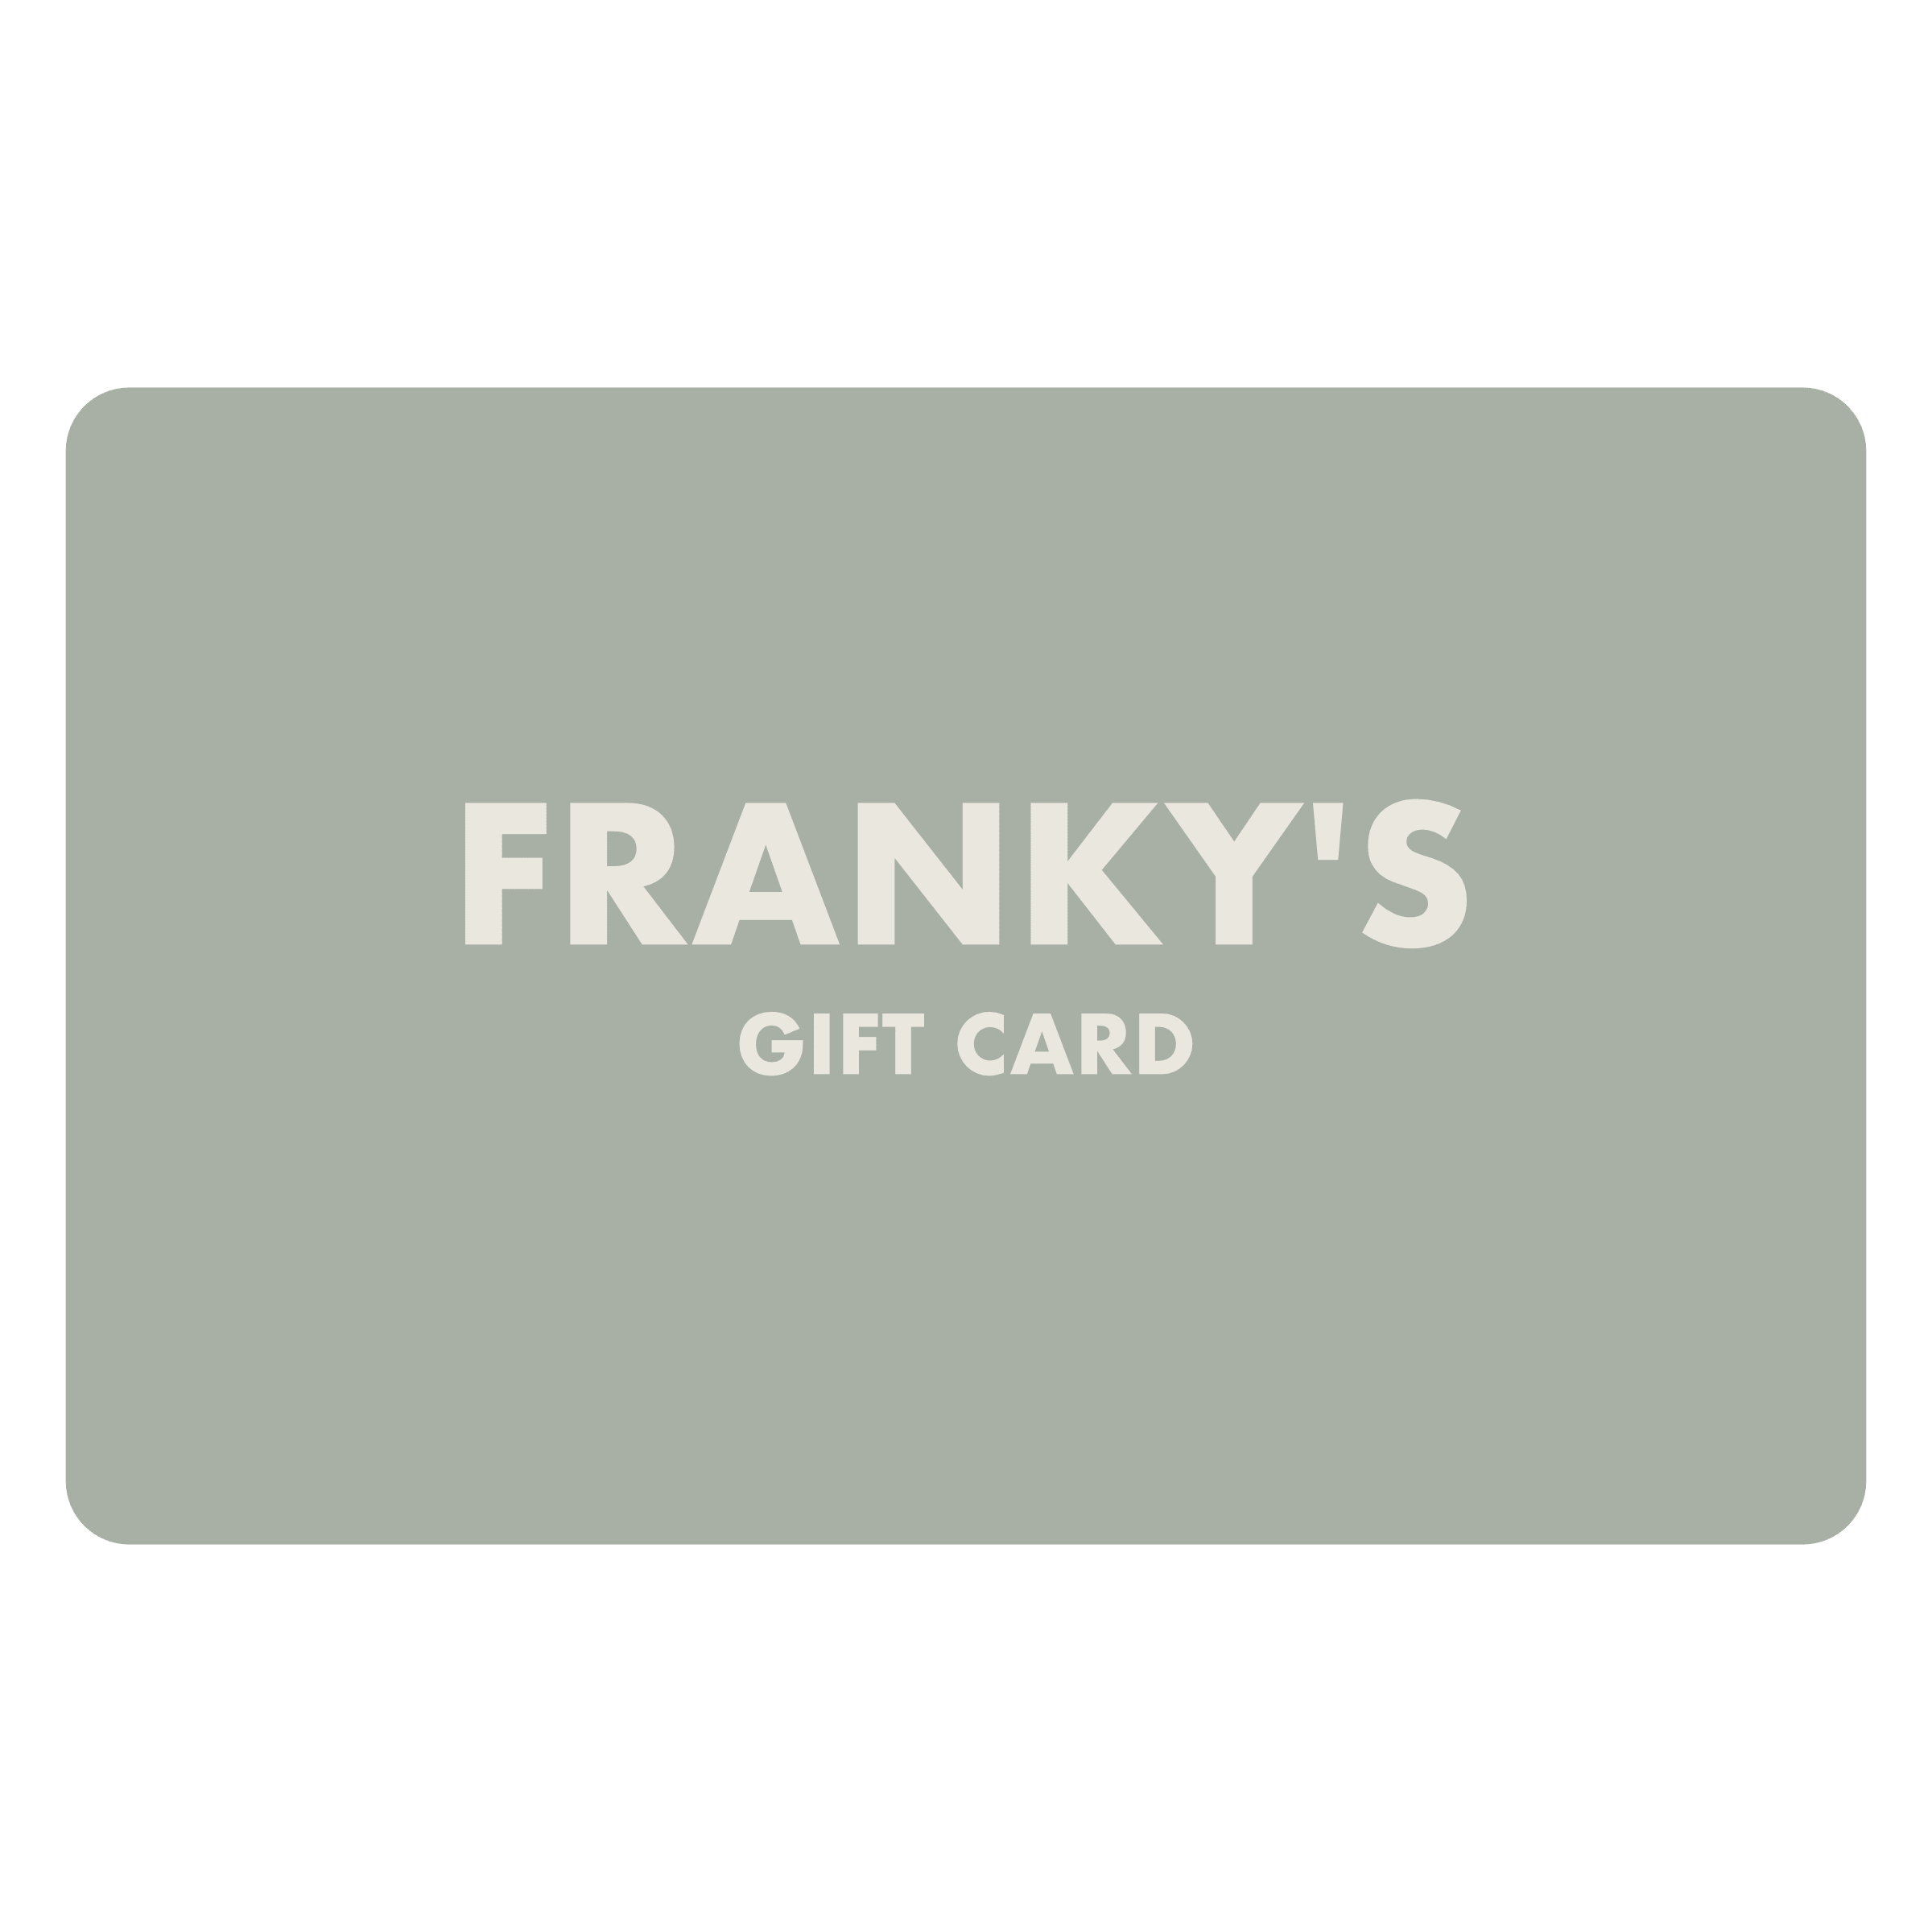 Franky's Gift Card - Buy Gift Card Online at FRANKY'S